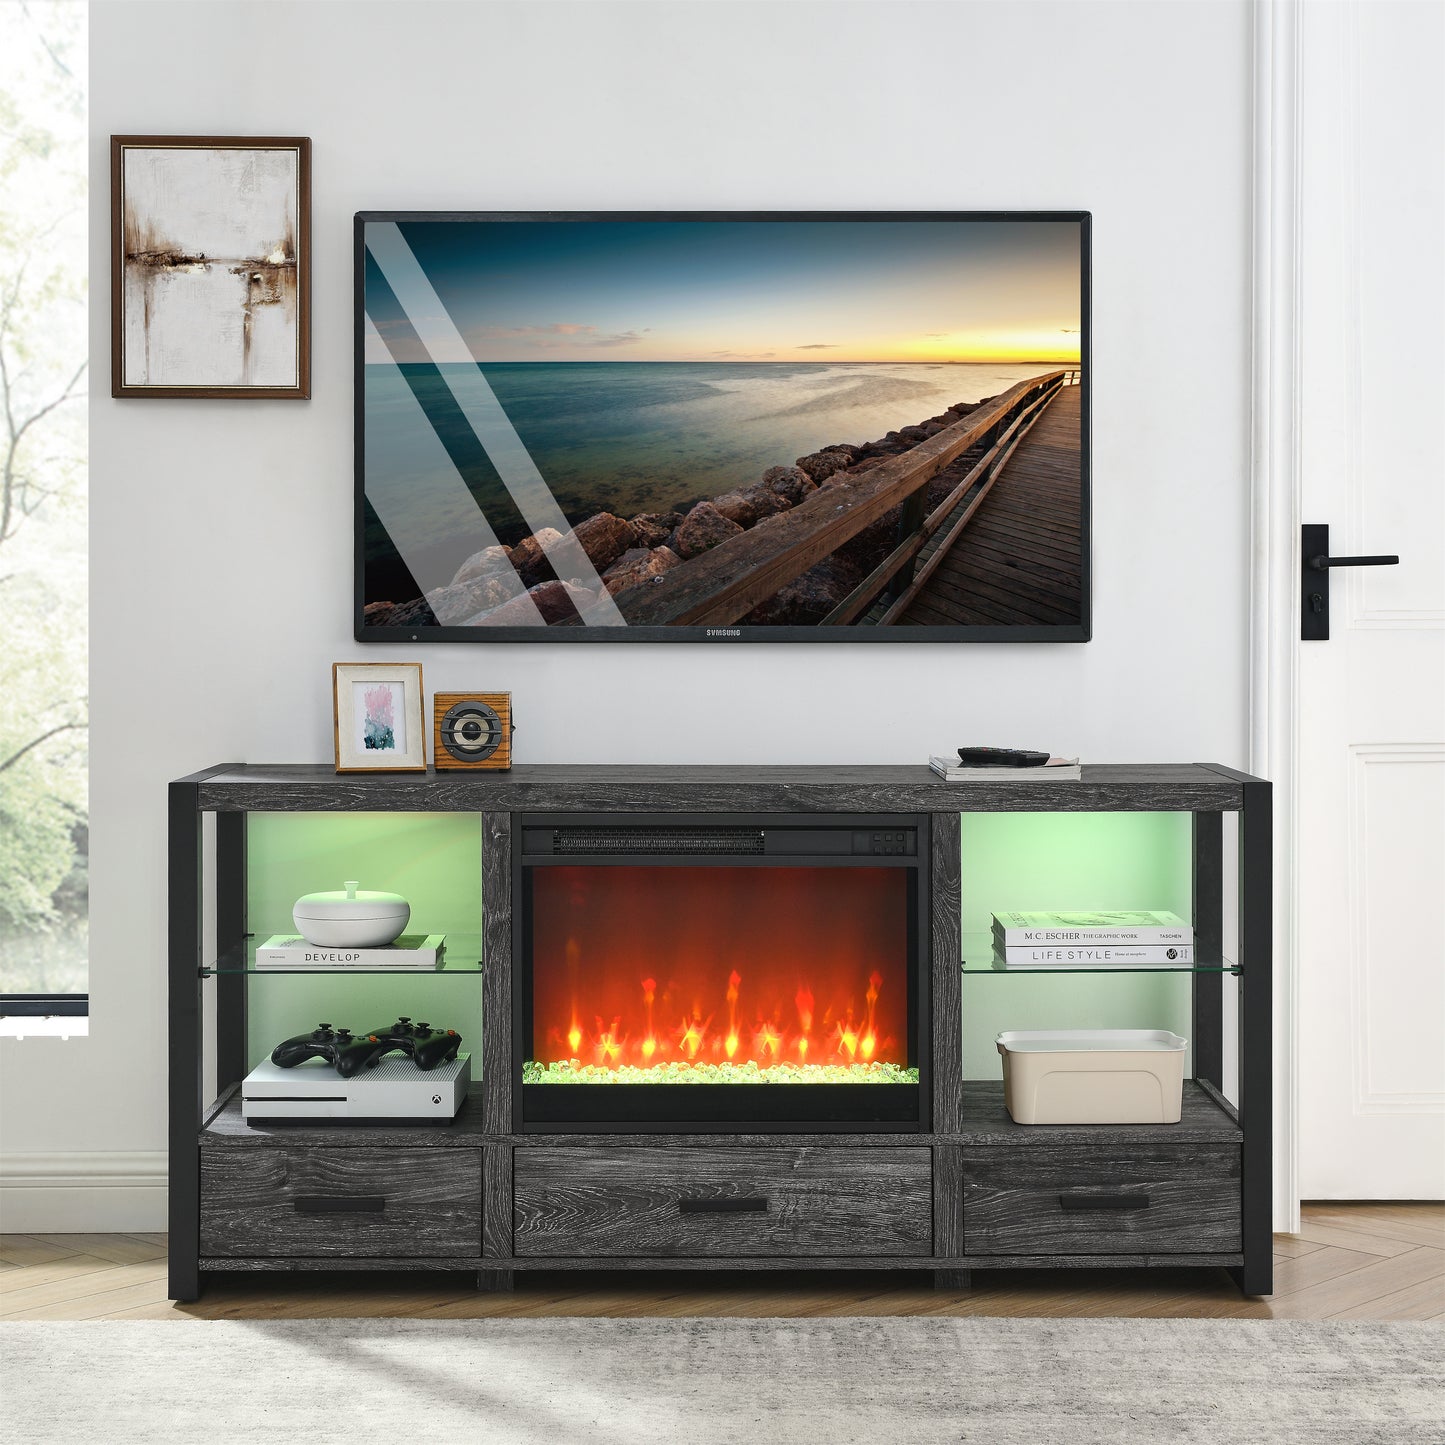 60 Inch Electric Fireplace Media TV Stand With Sync Colorful LED Lights-Dark rustic oak color - Enova Luxe Home Store